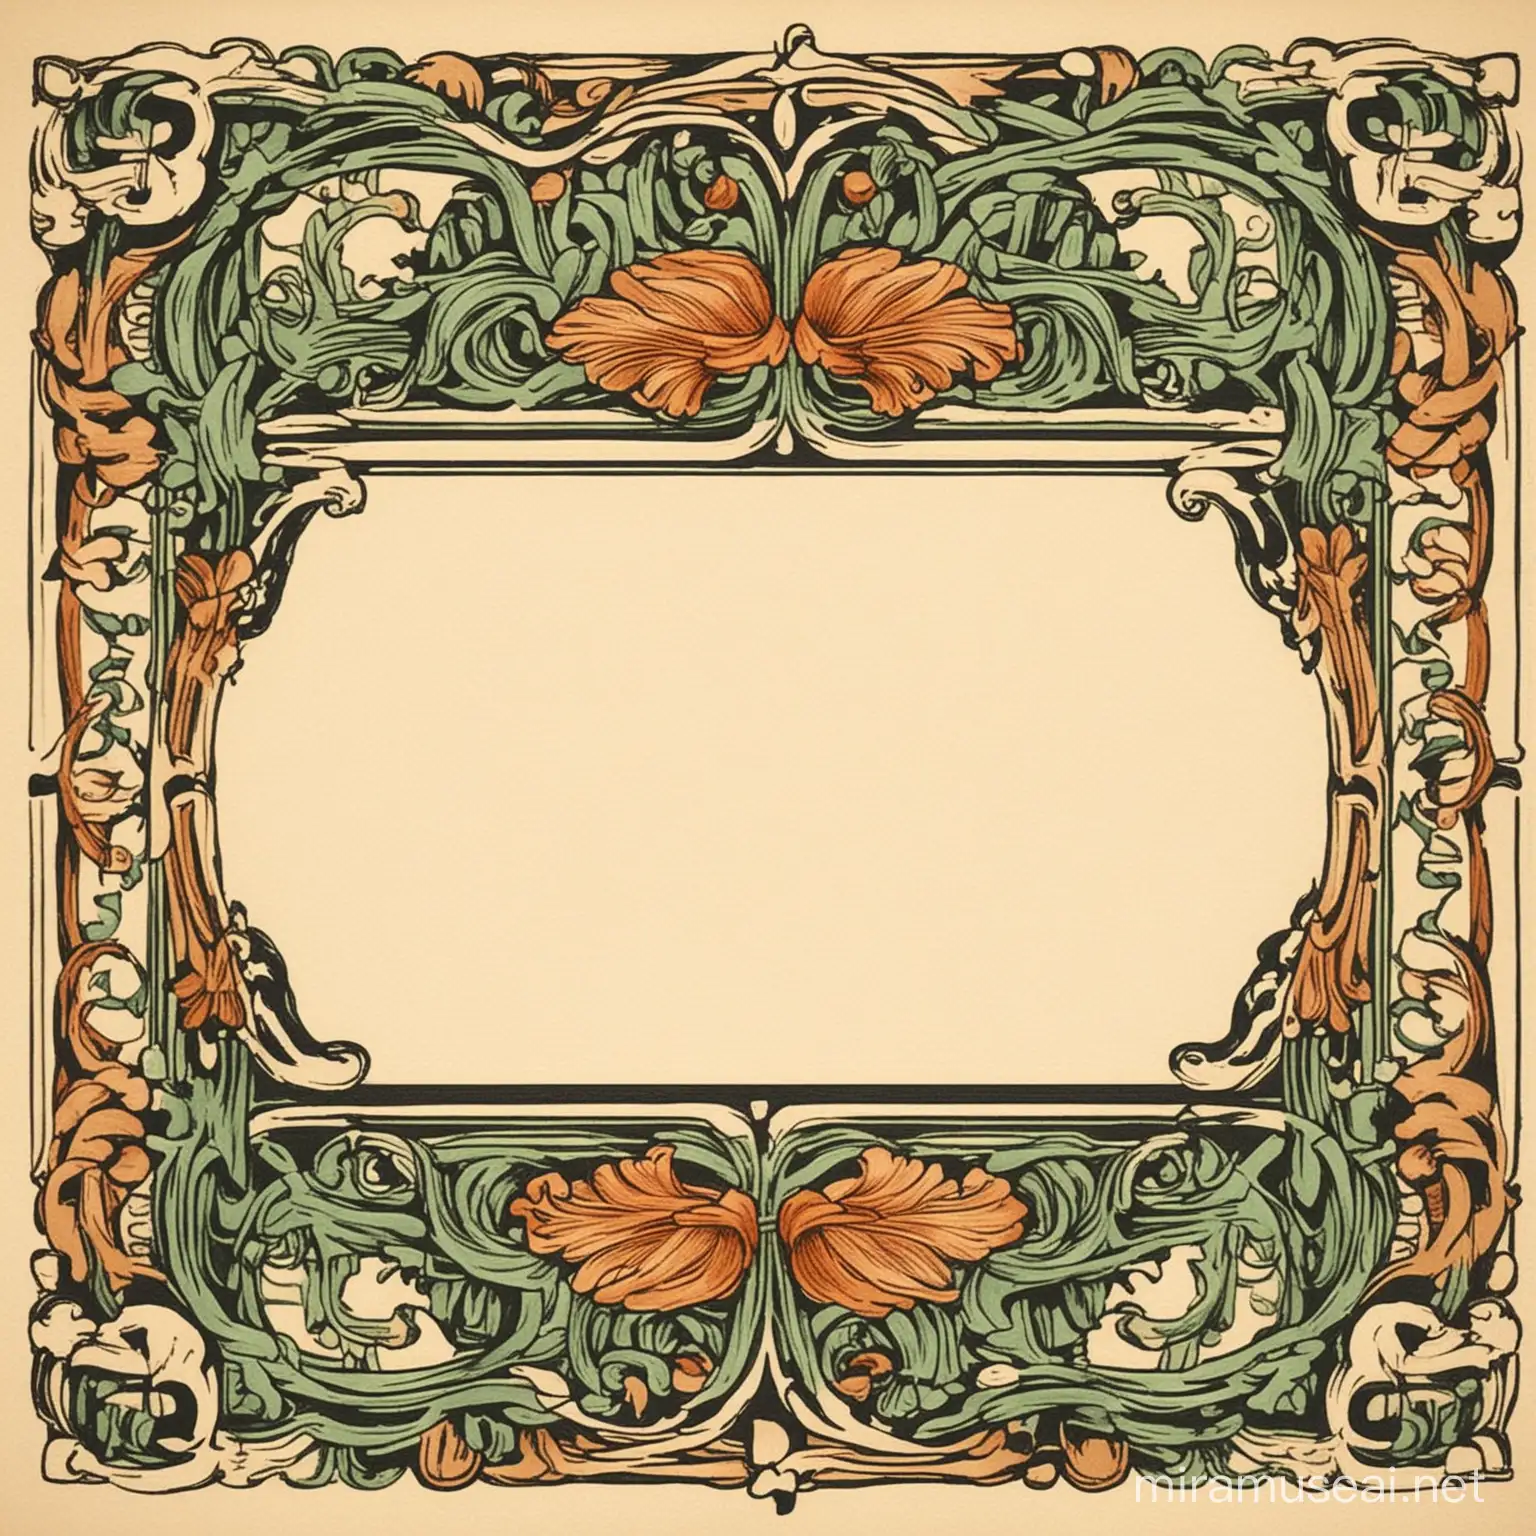 1940 art, art nouveau border with a text space in between , simplified